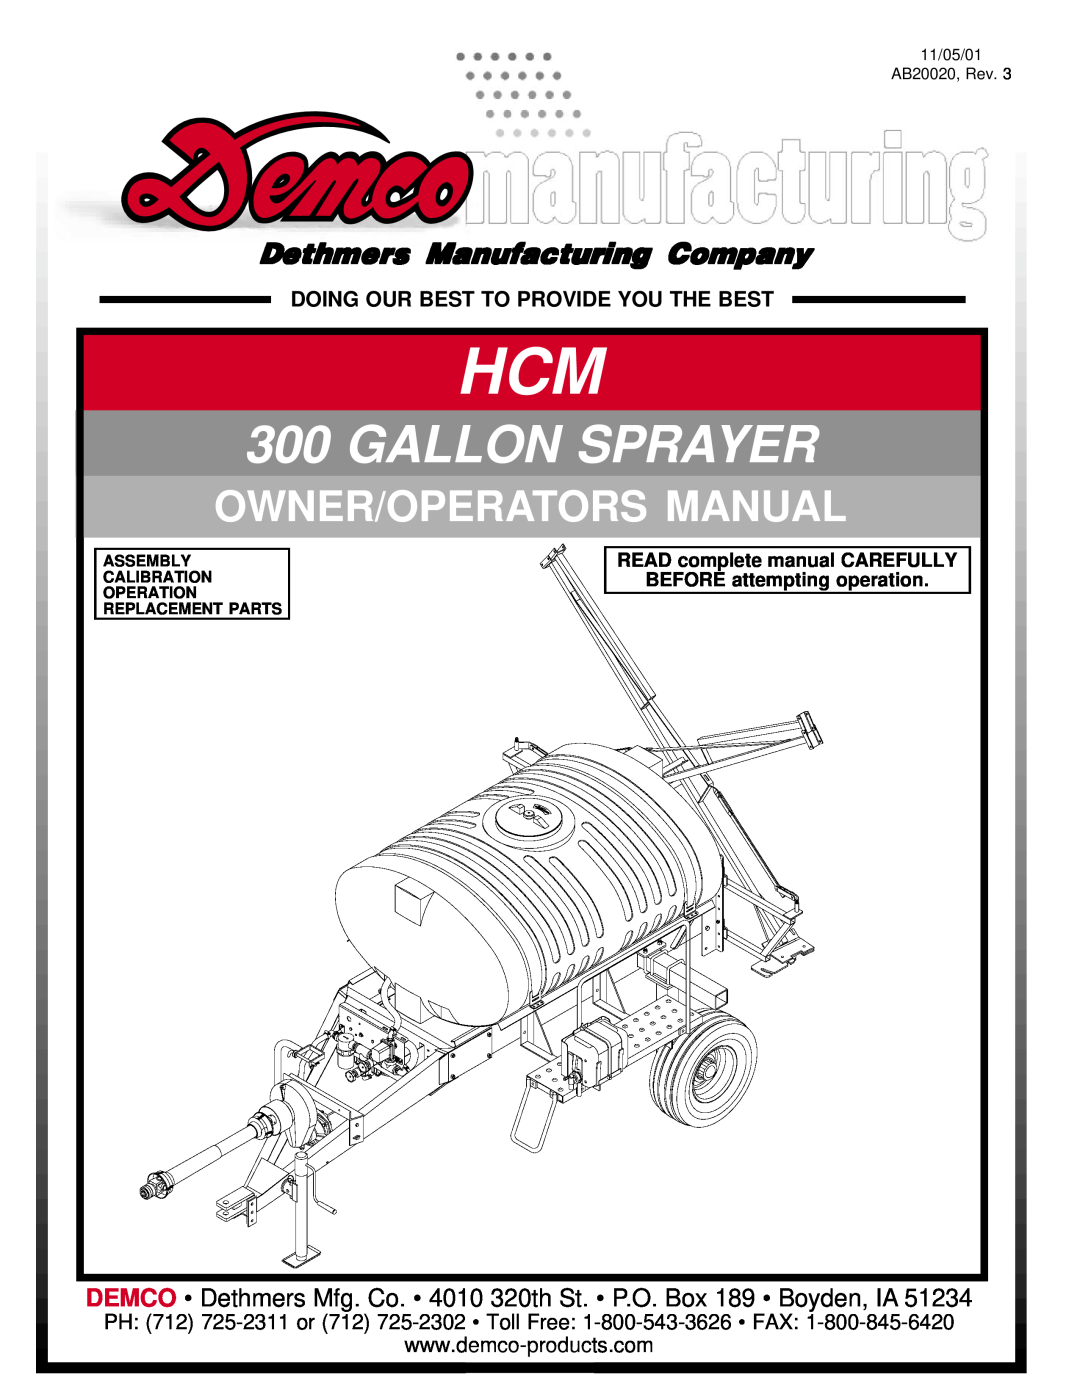 Demco manual Gallon Sprayer, Owner/Operators Manual, Dethmers Manufacturing Company, READ complete manual CAREFULLY 